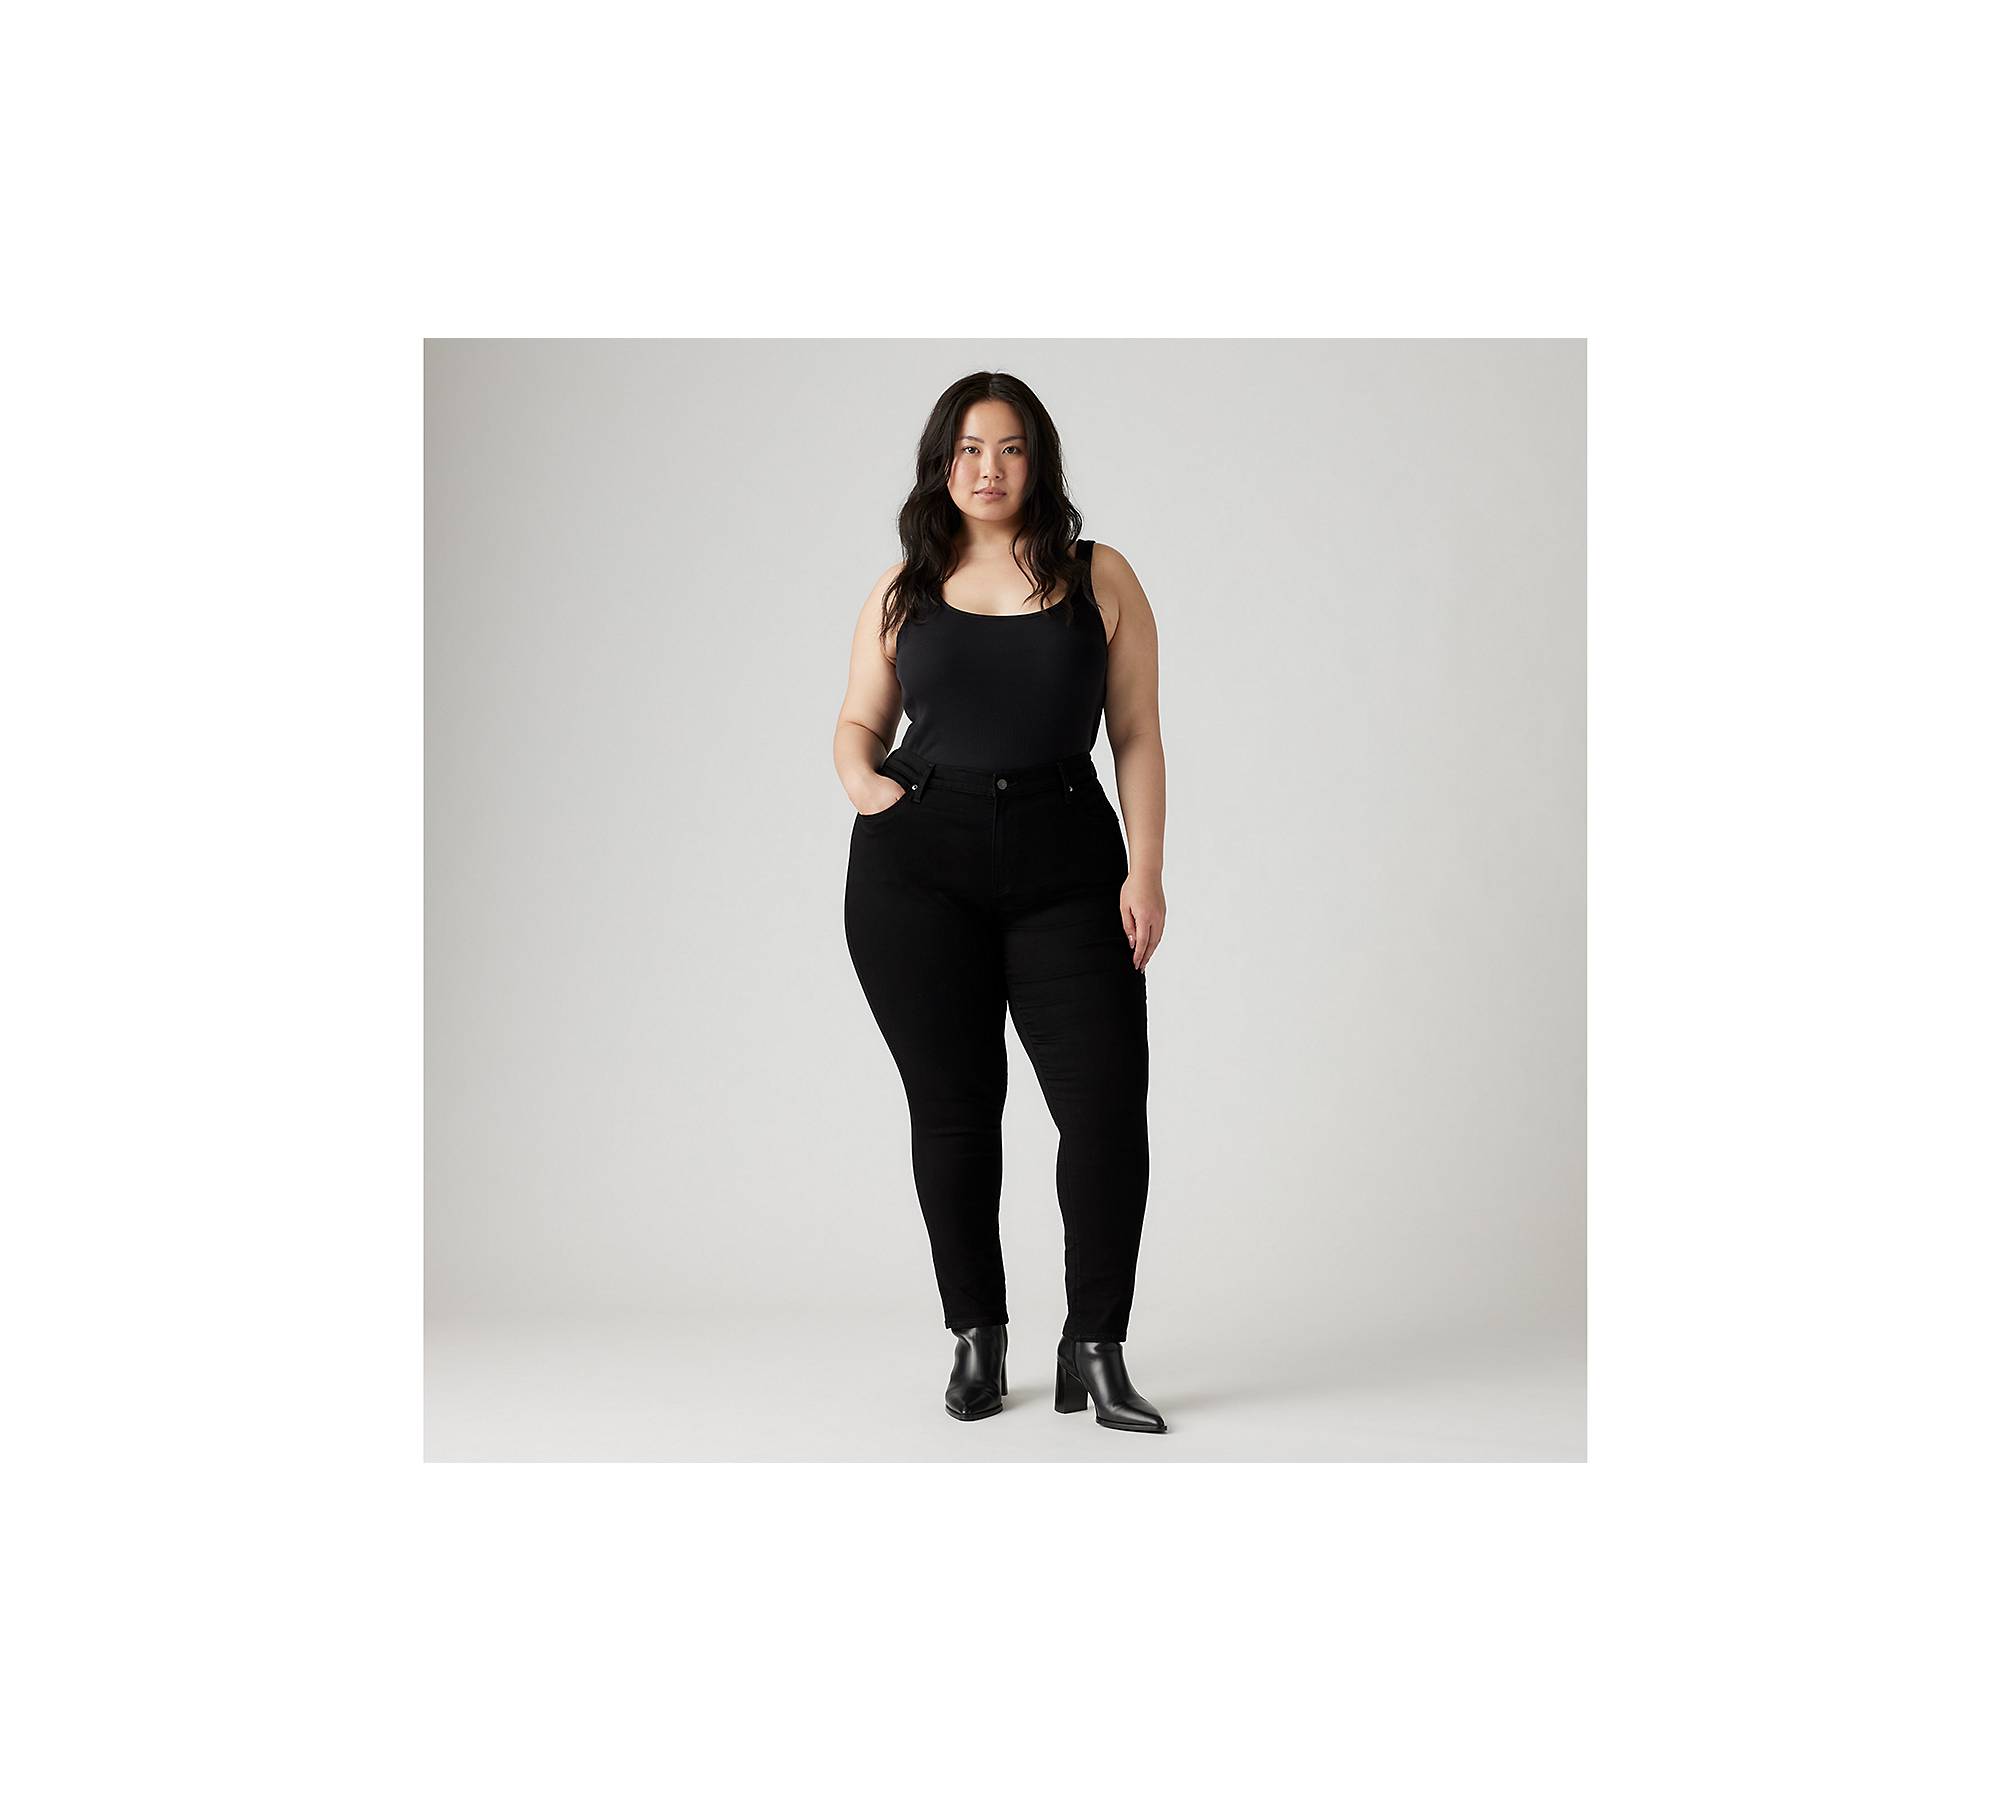 Women's Plus Size Clothing - Buy Skinny Jeans, T-shirts & More